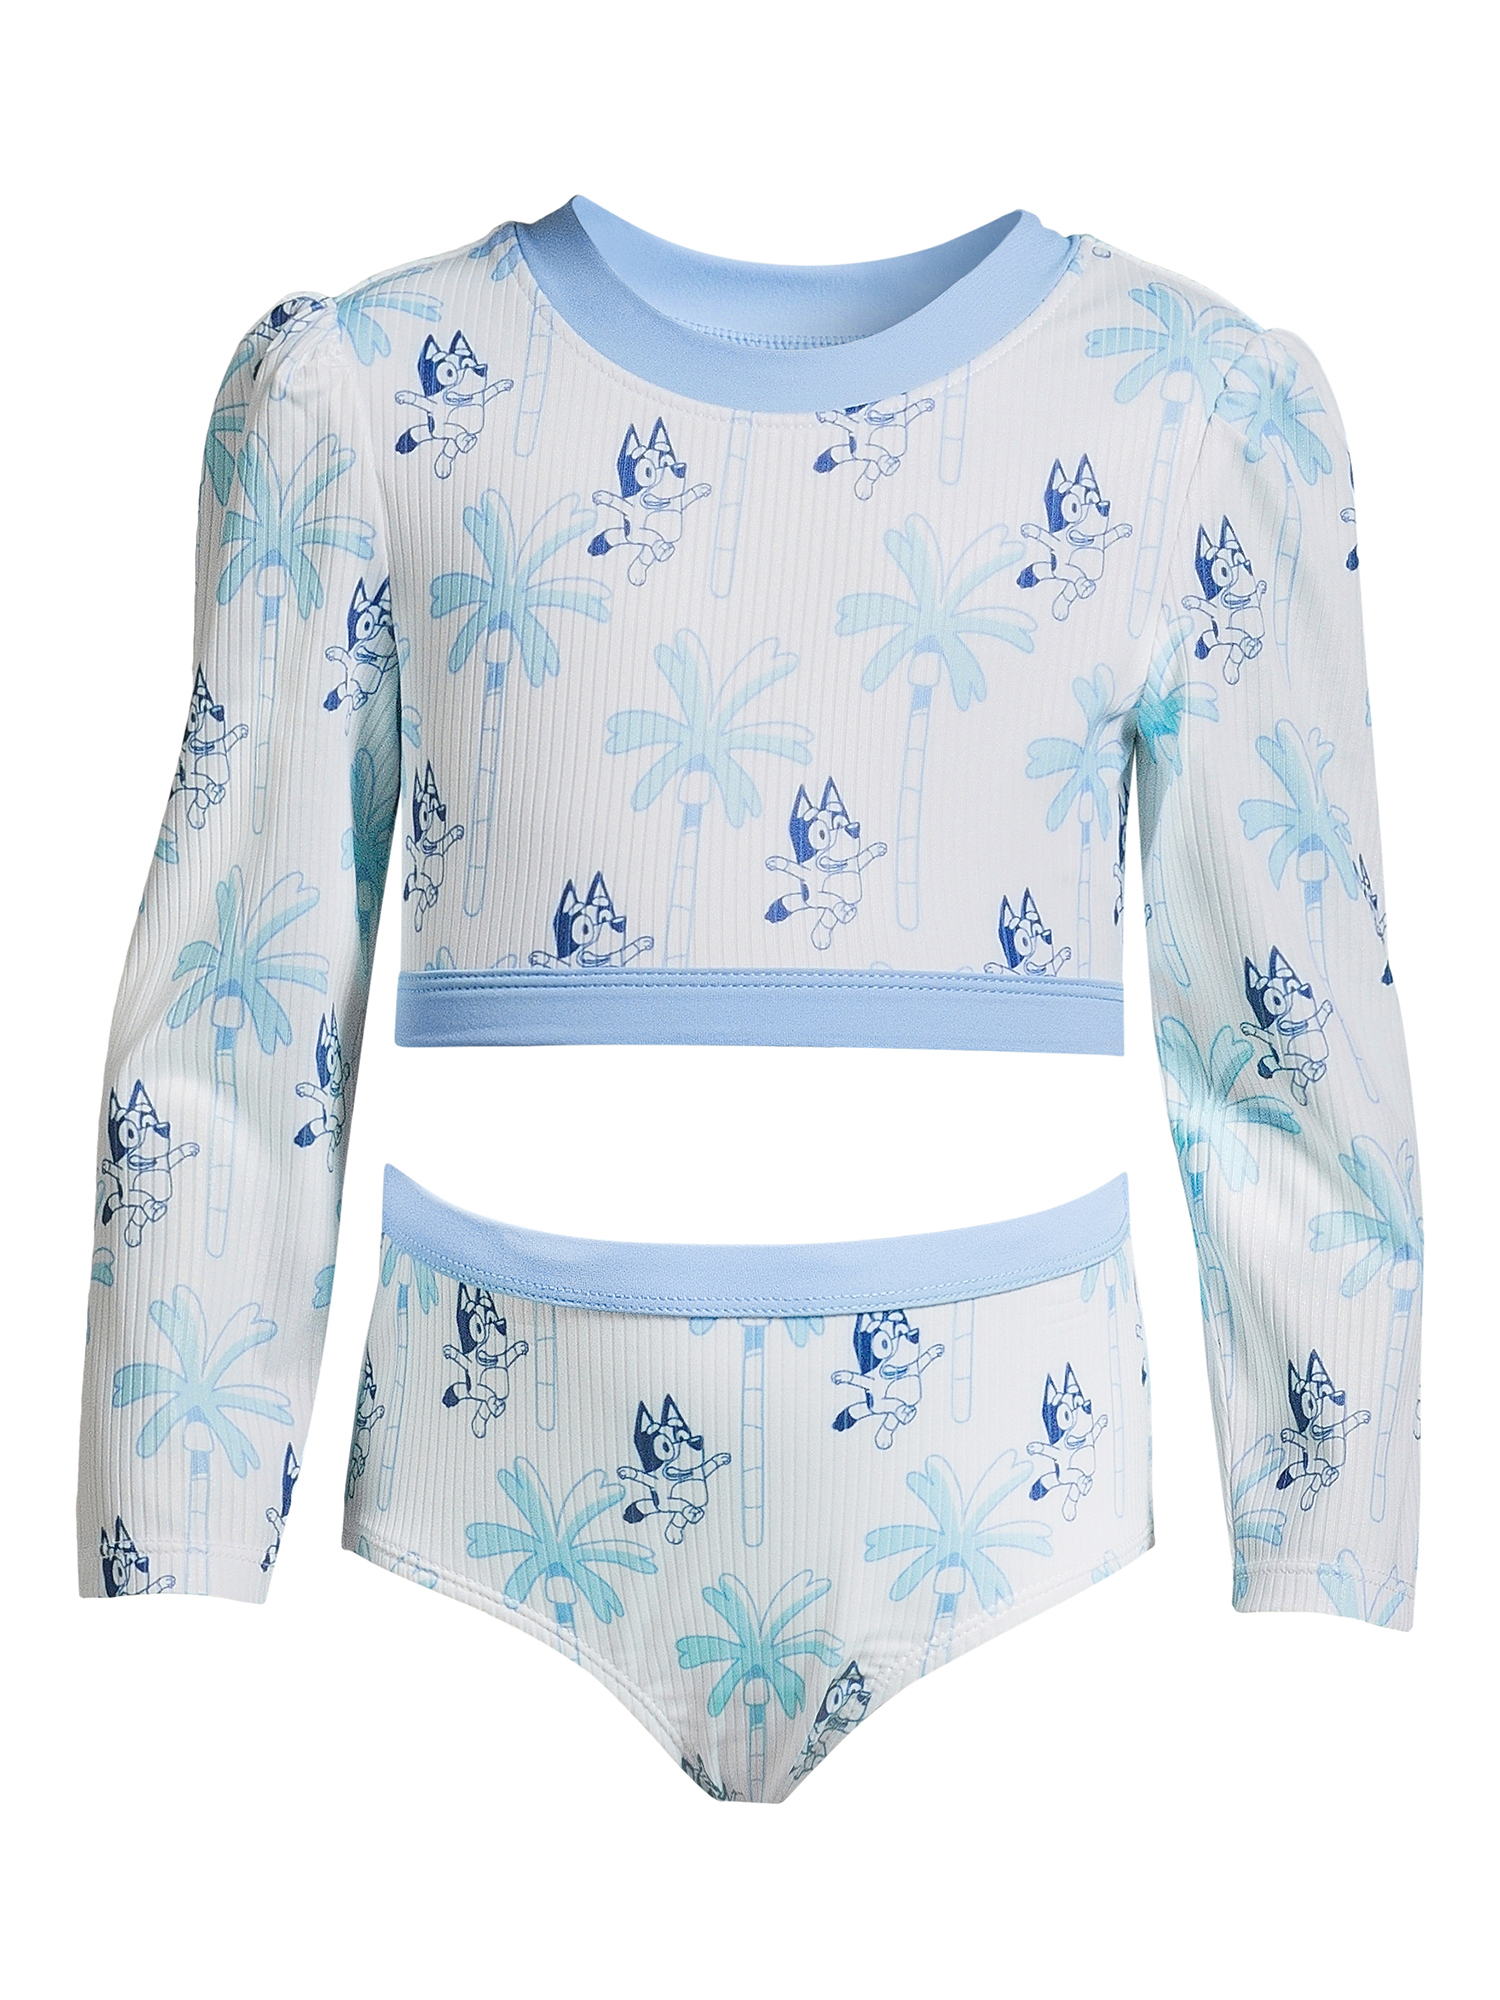 Bluey Baby and Toddler Girls' Long Sleeve Swimsuit with UPF 50, Sizes ...